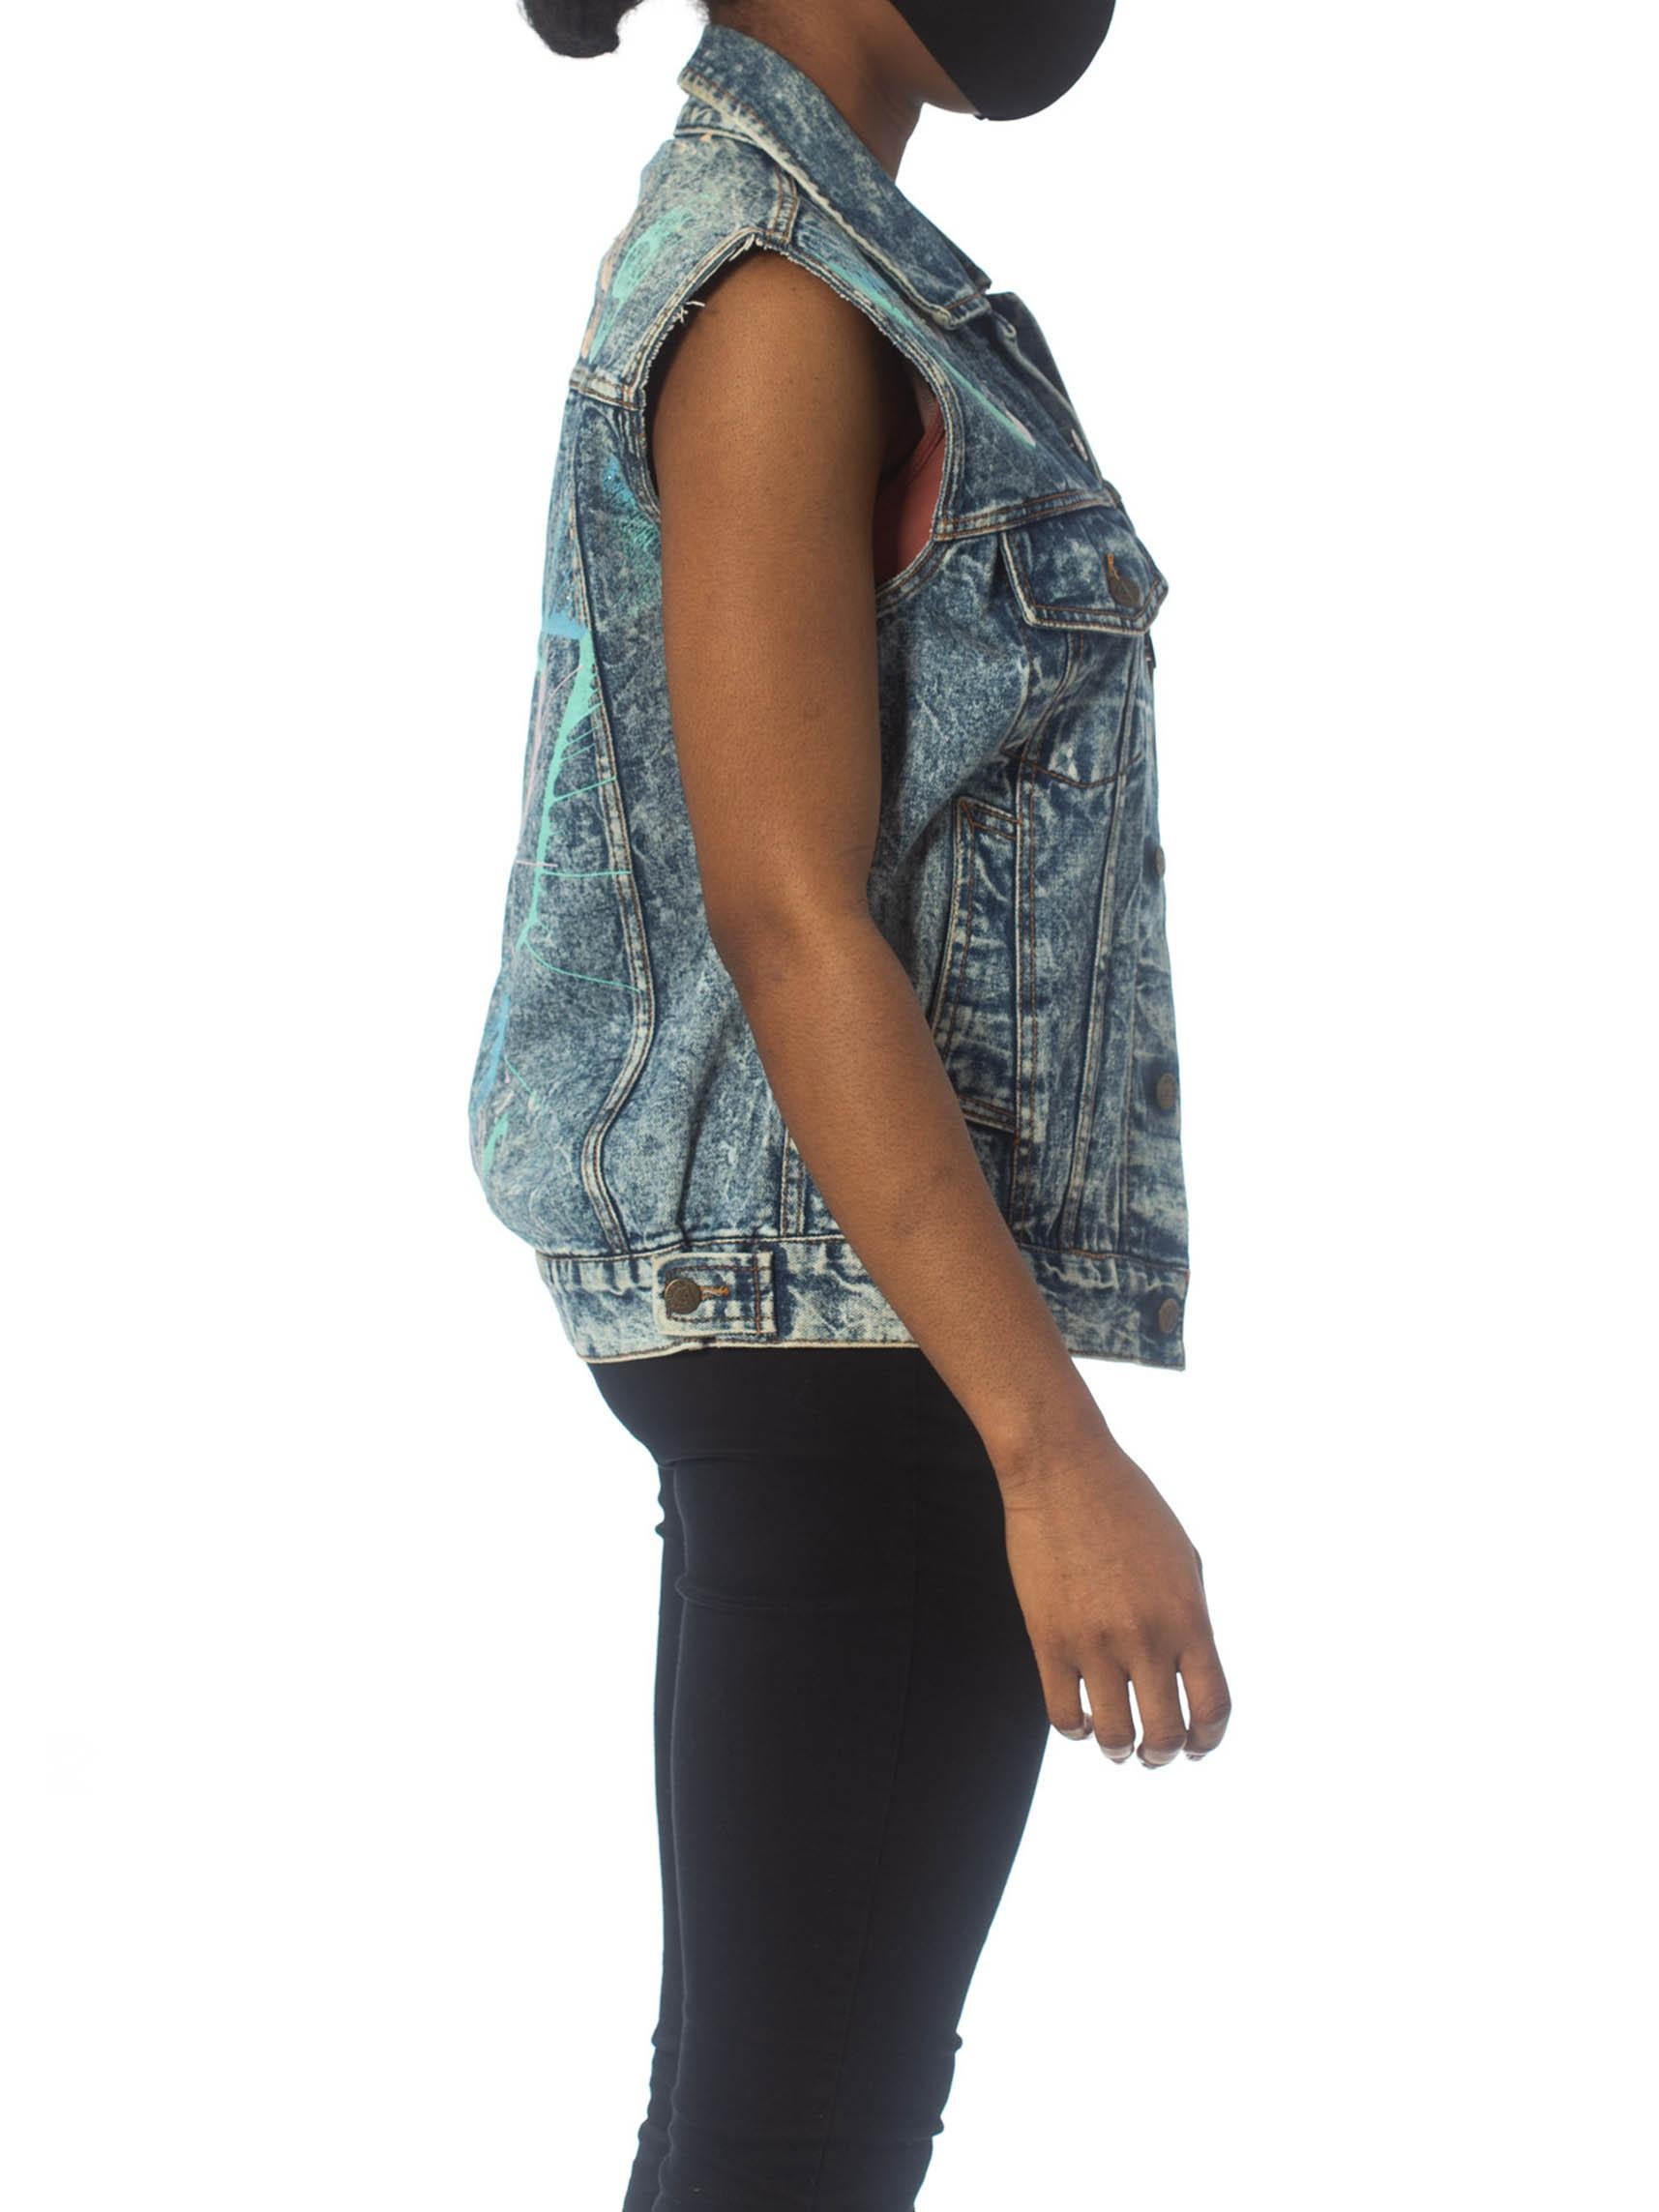 1990S GUESS Glitter Puffy Painted Acid Washed Denim Vest For Sale 1